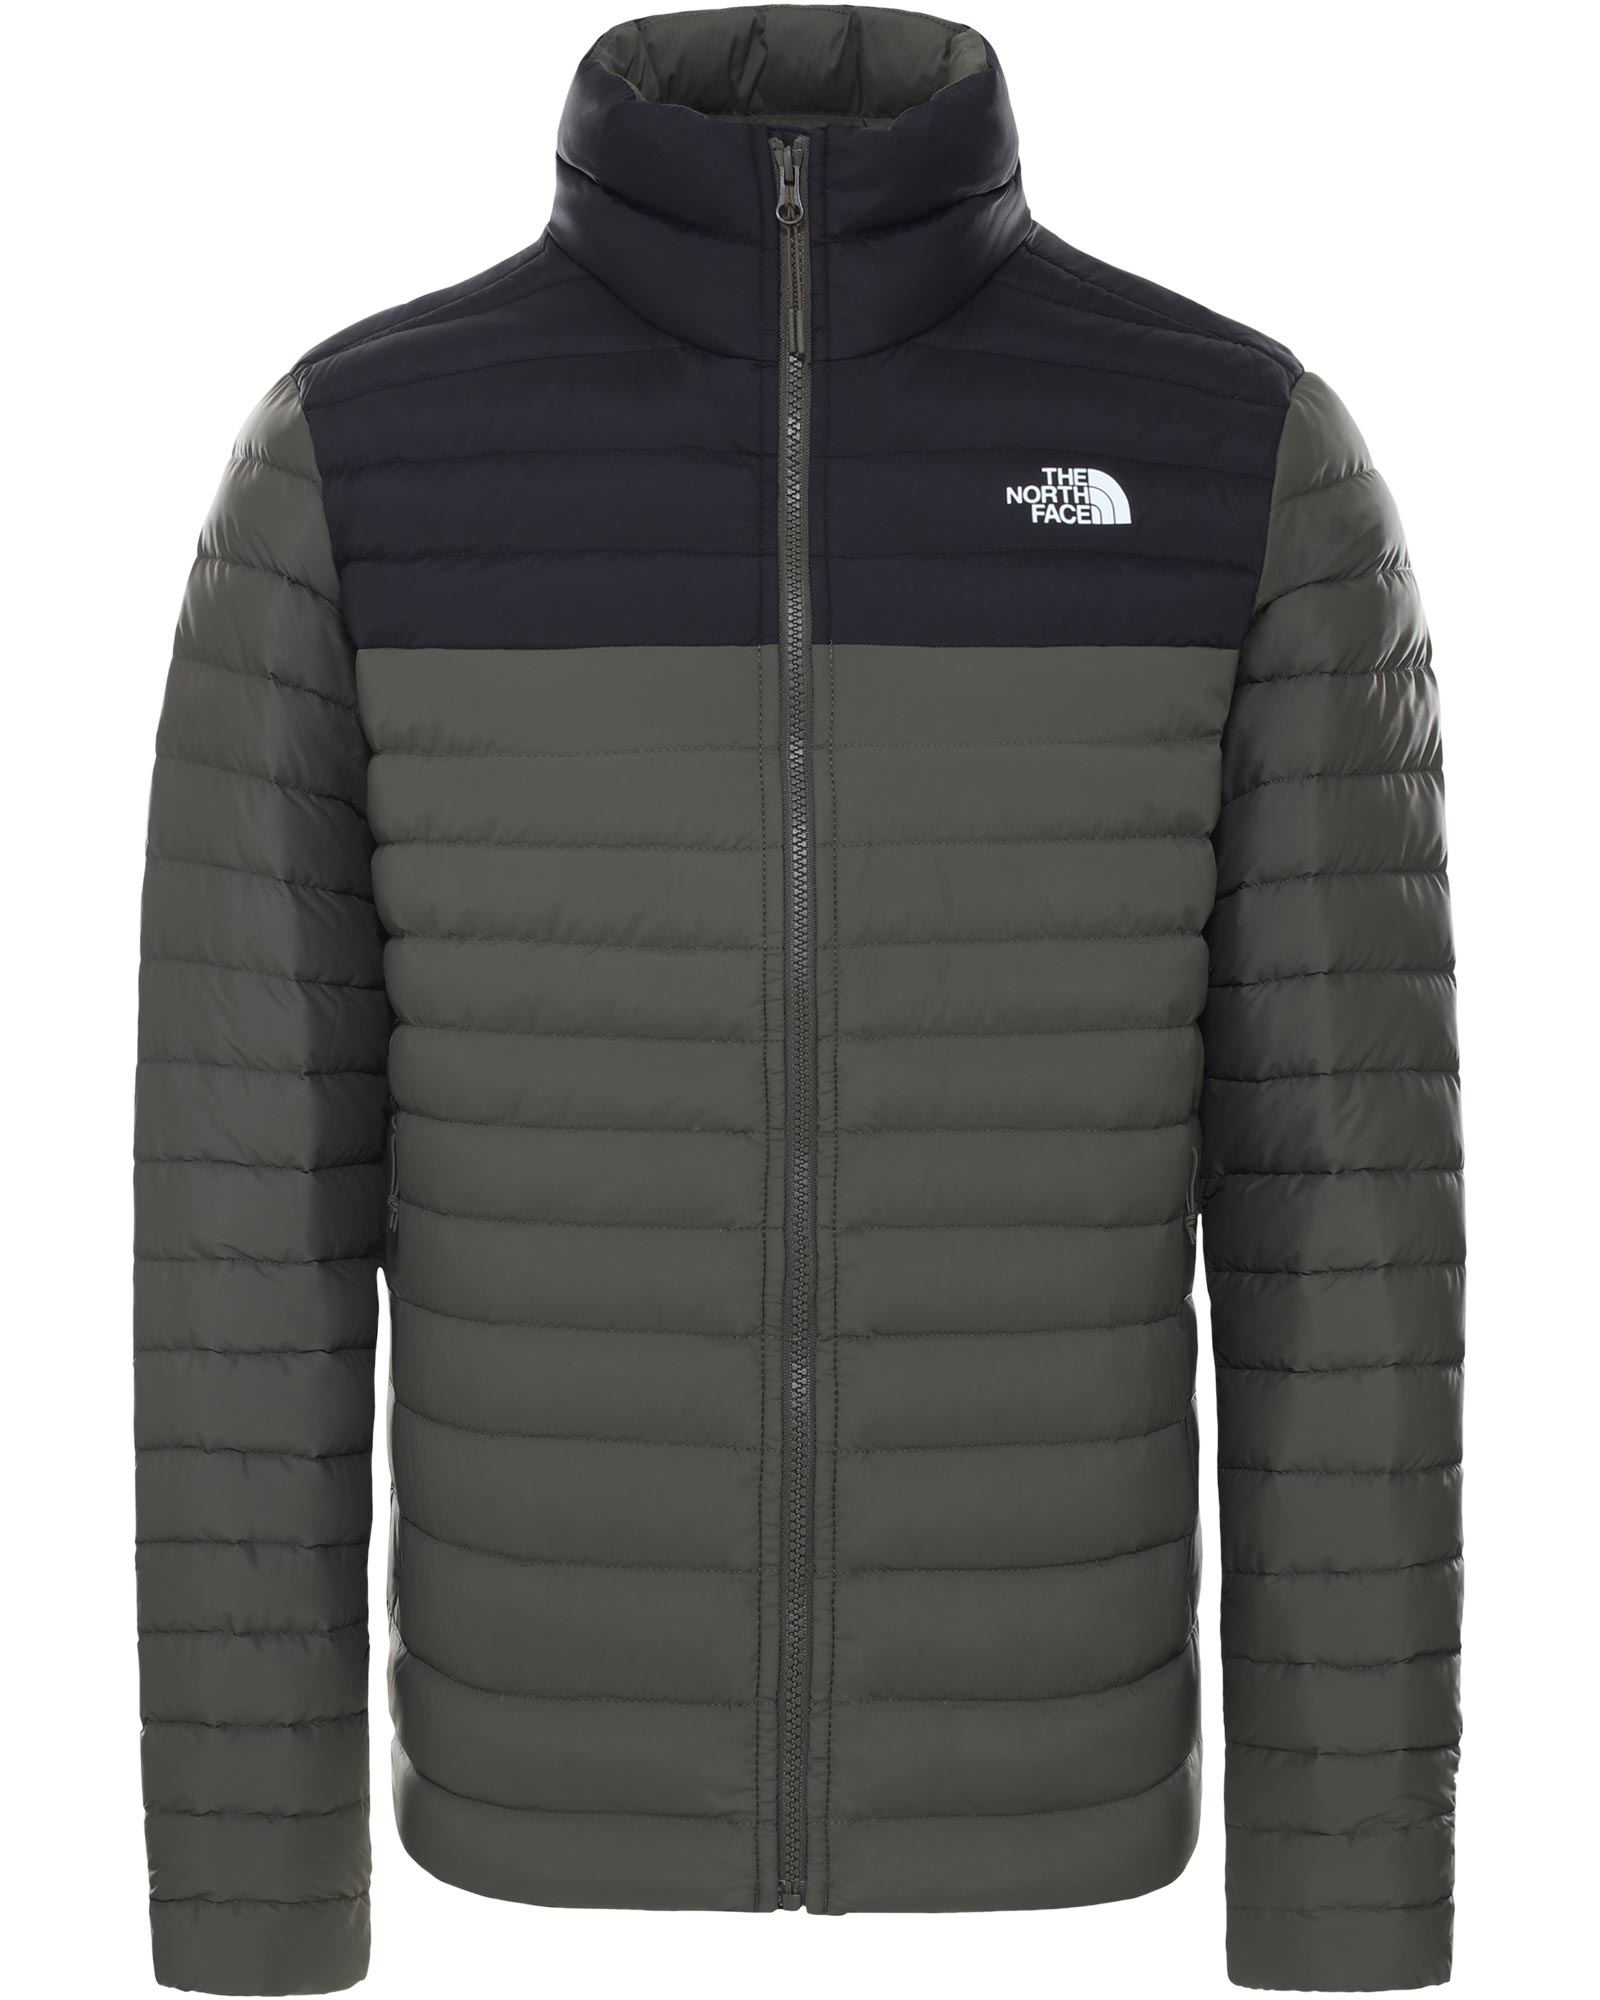 Product image of The North Face Stretch Down Men's Jacket